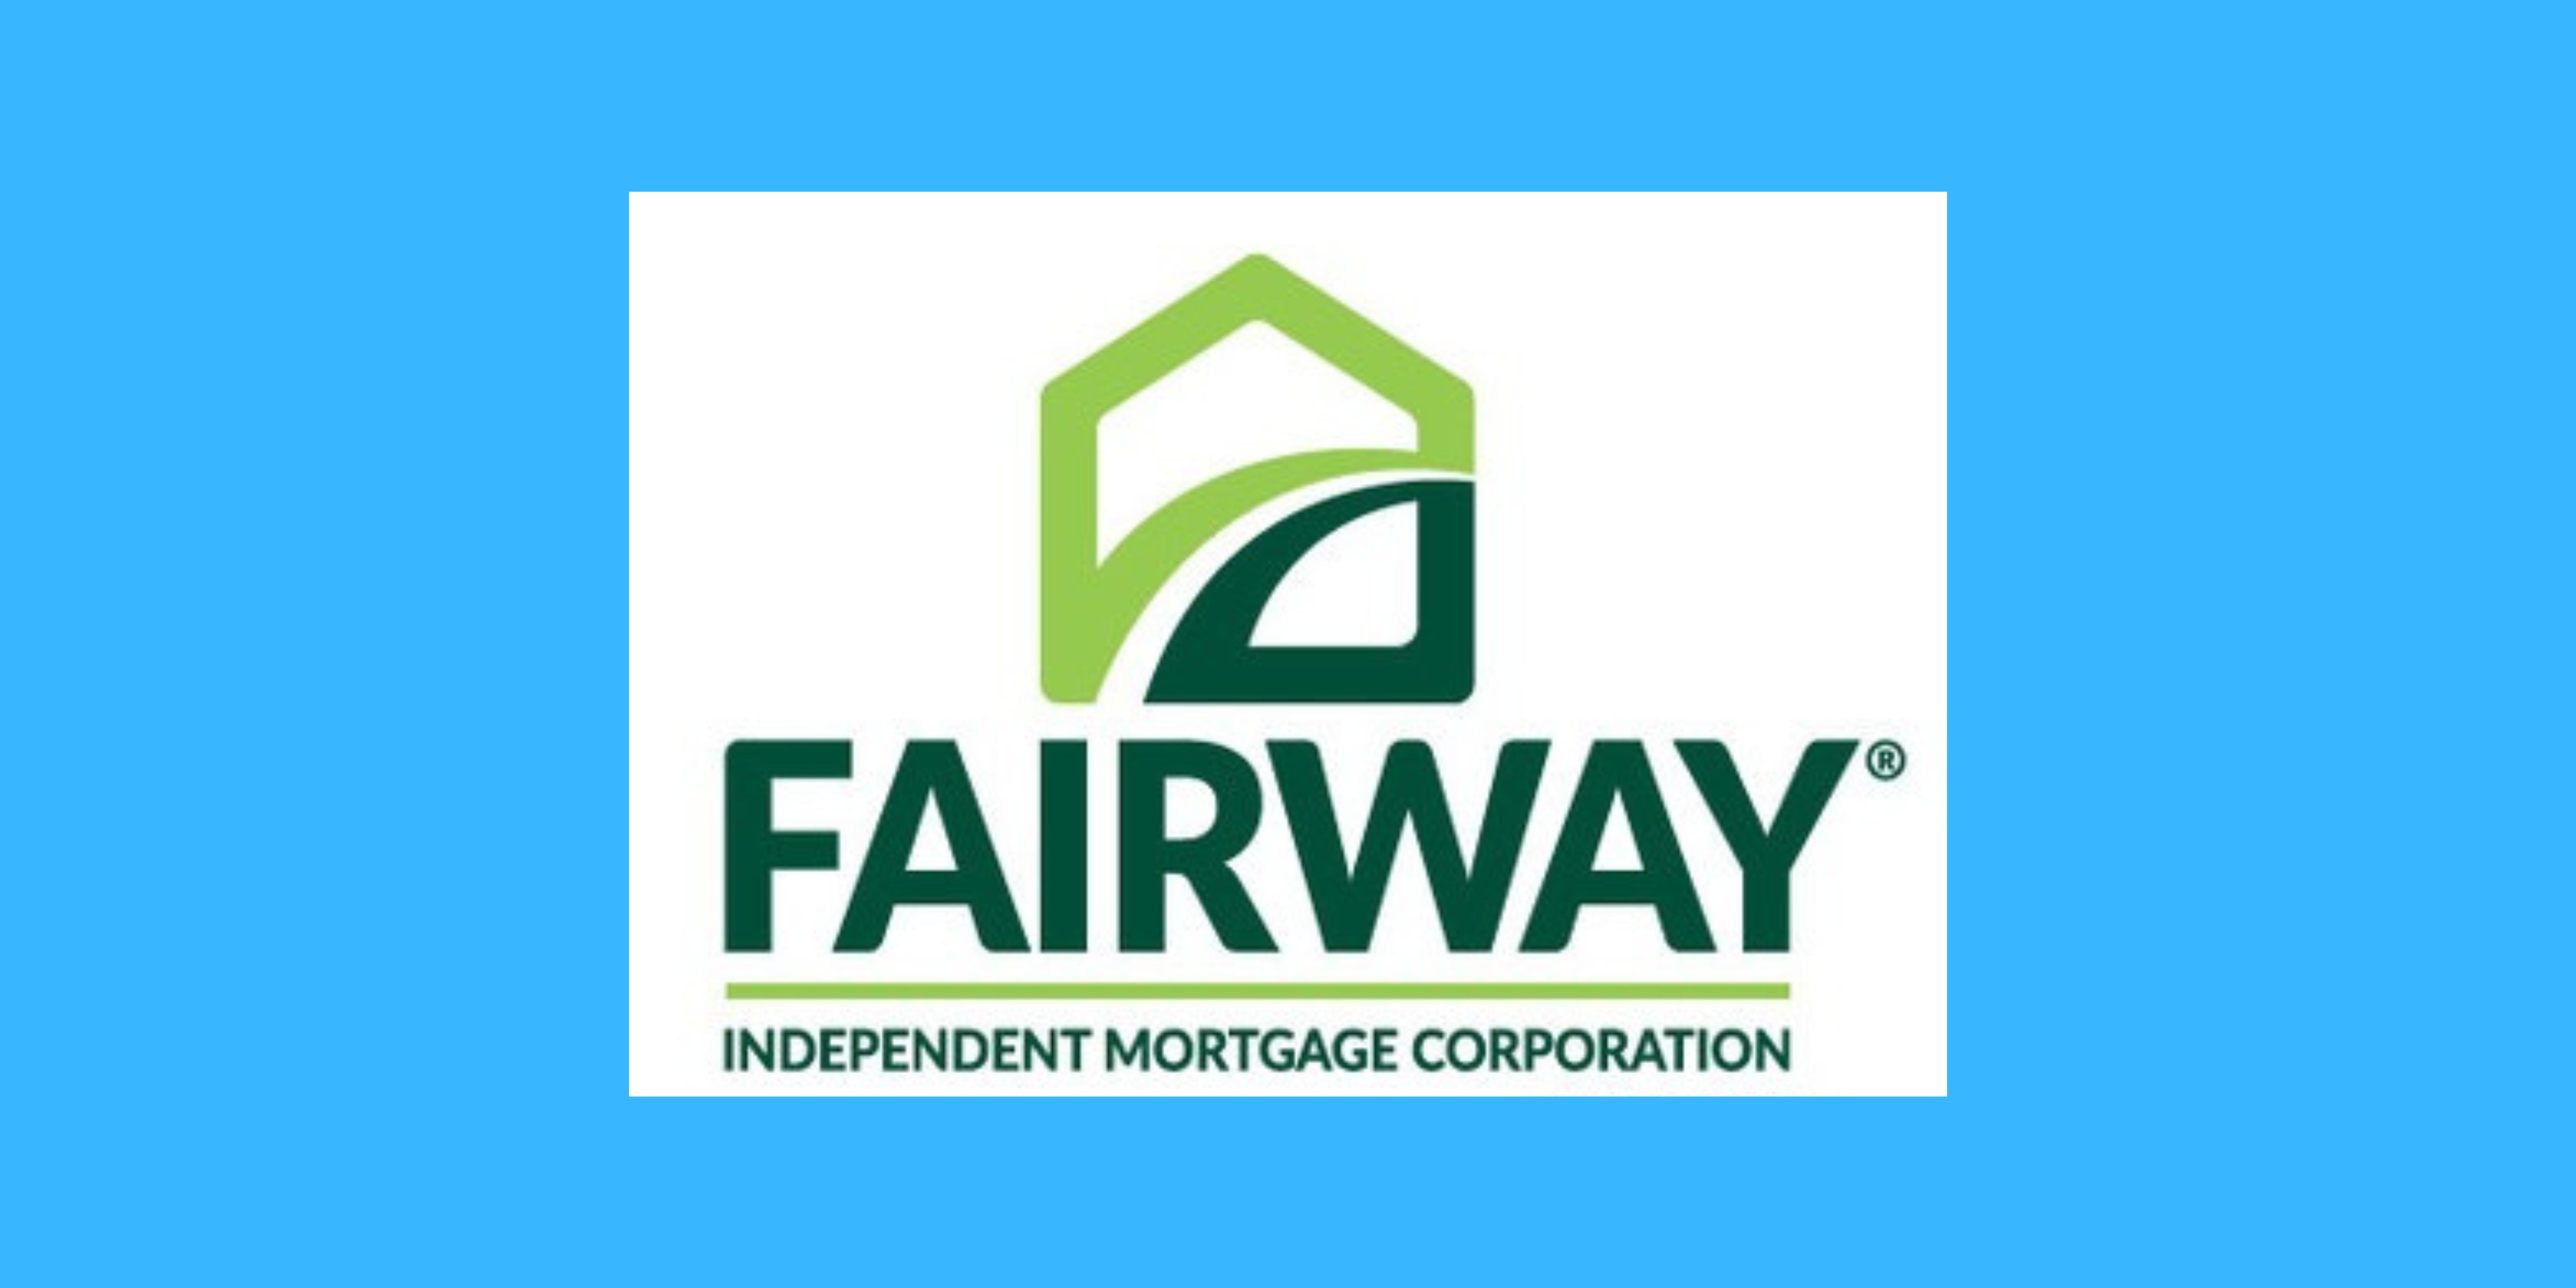 Fairway Rolls Out Down Payment Assistance Program For First-Time Buyers